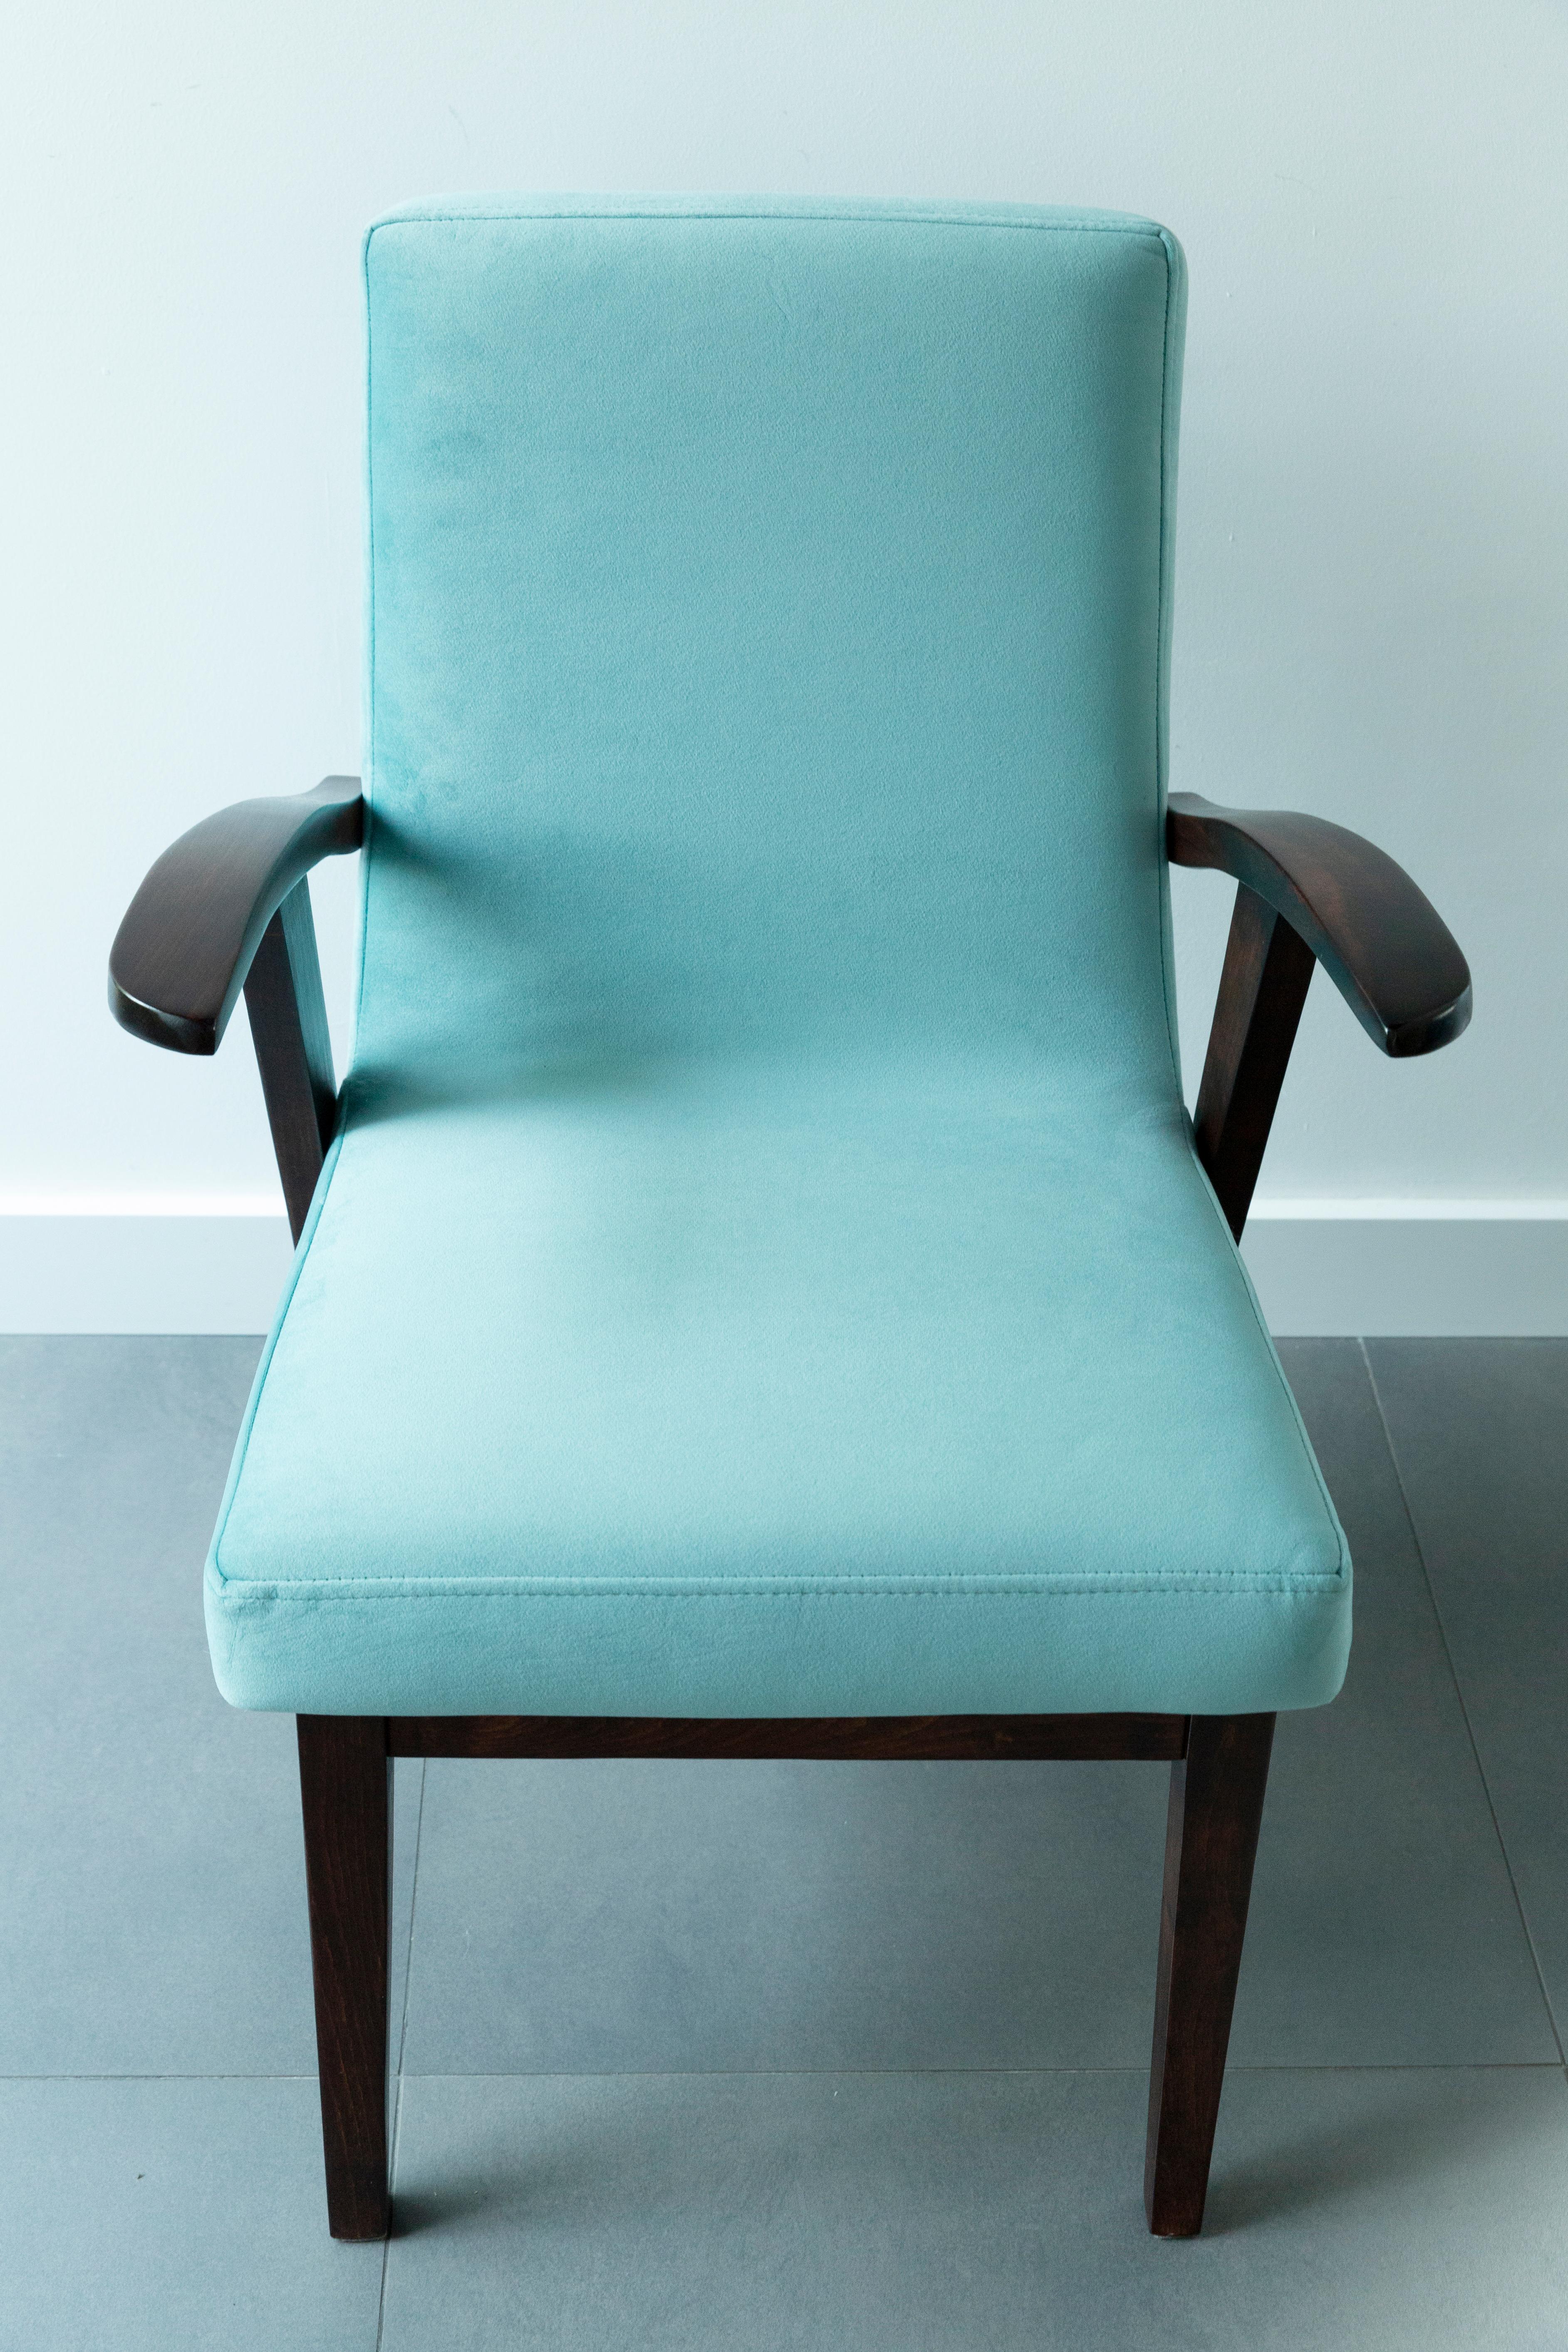 20th Century Vintage Mint Green Armchair by Mieczyslaw Puchala, 1960s For Sale 2